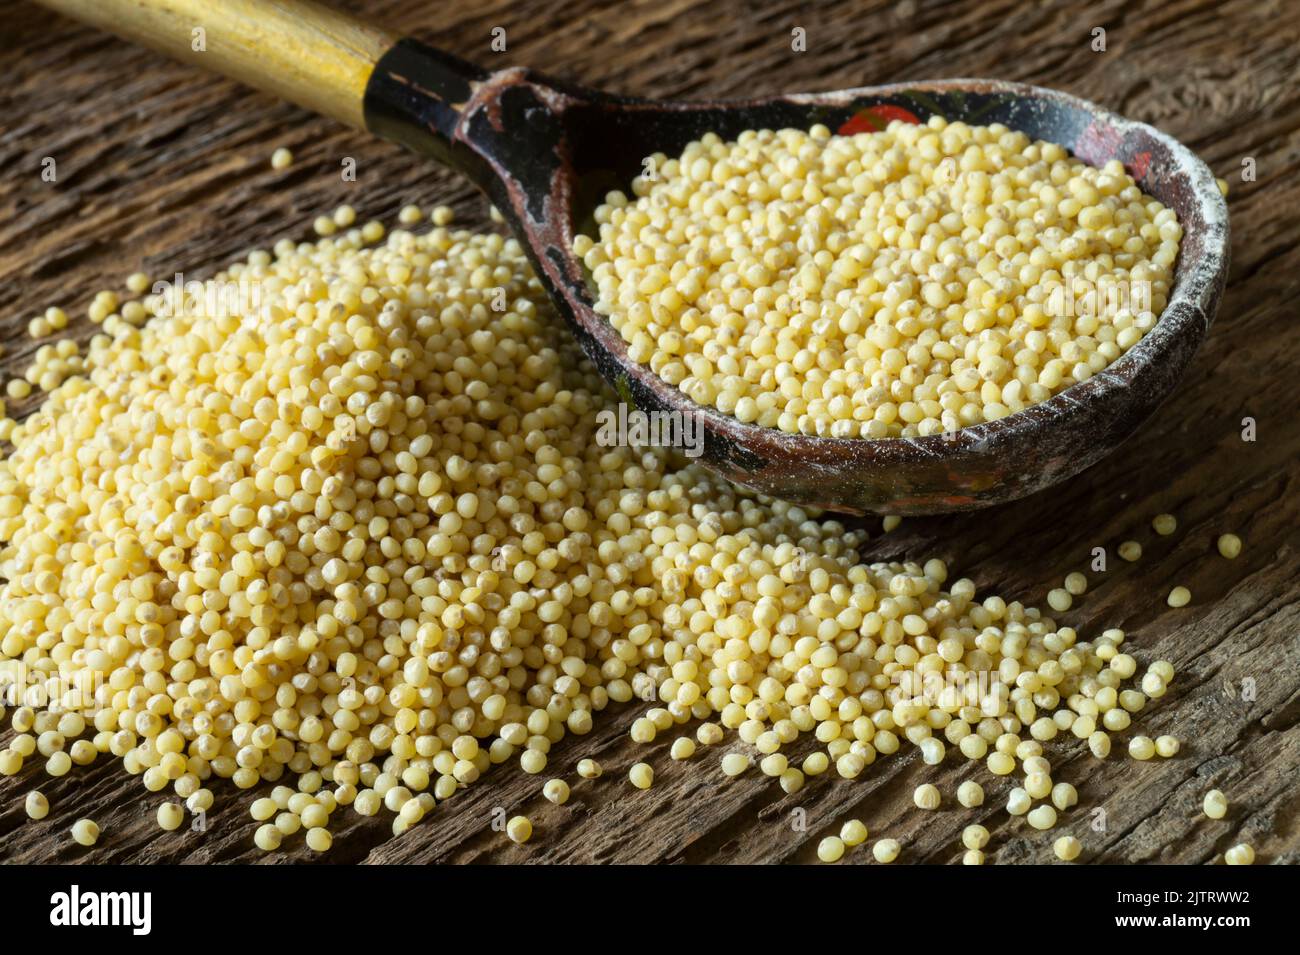 Still life with food on an old board. Round grain grain of yellow color Stock Photo